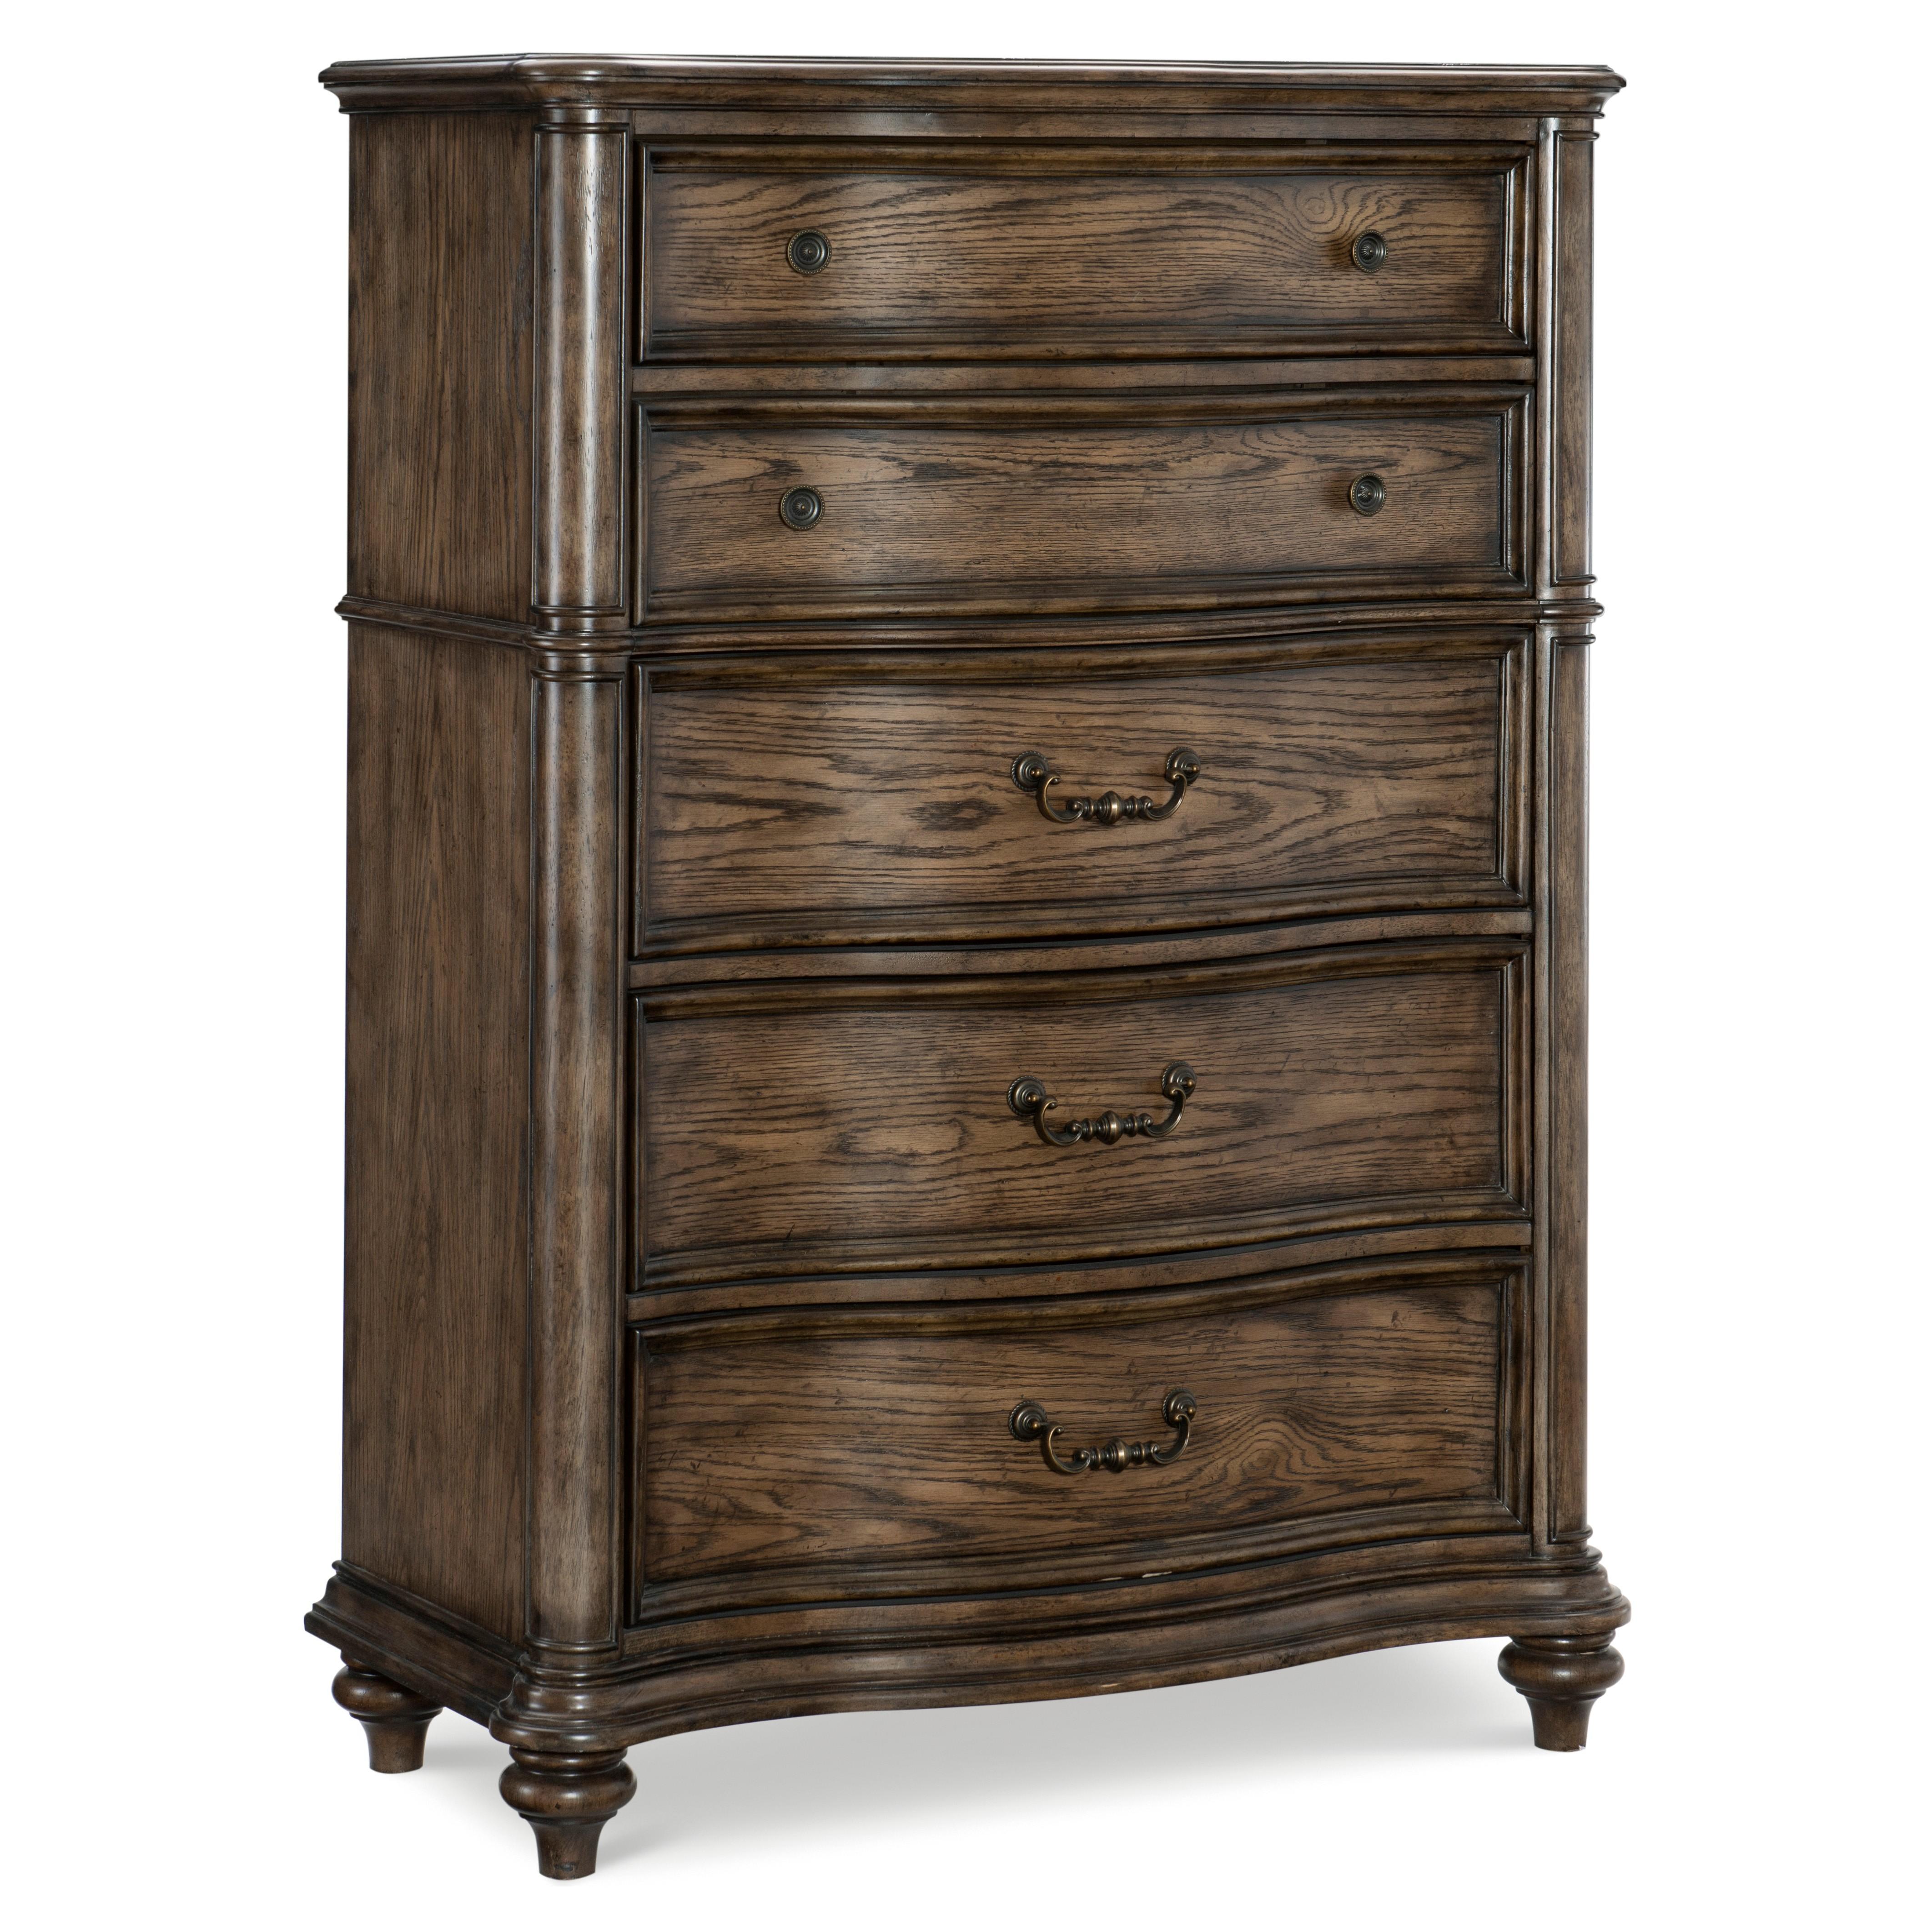 Traditional Chest 1682-9 Heath Court 1682-9 in Brown Oak 